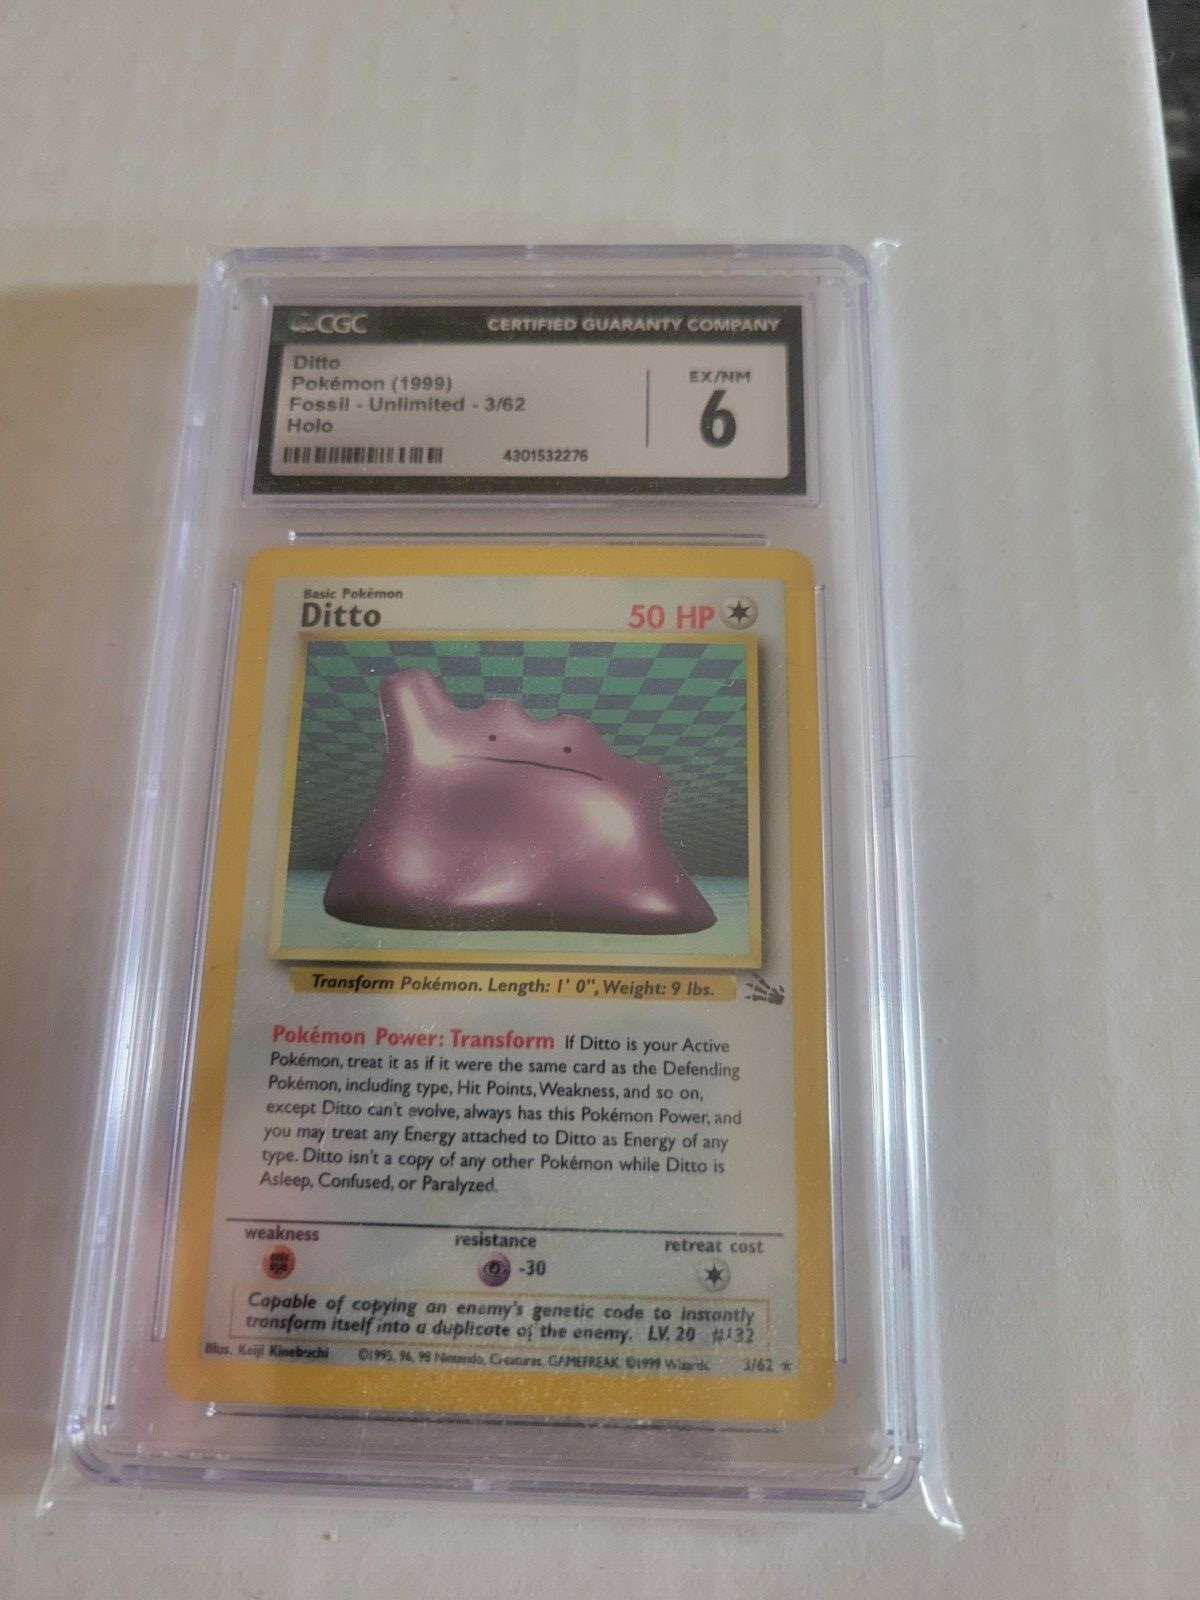 CGC 6 Ex/NM - Ditto - Fossil - Unlimited - 3/62 - Holo  (1999)